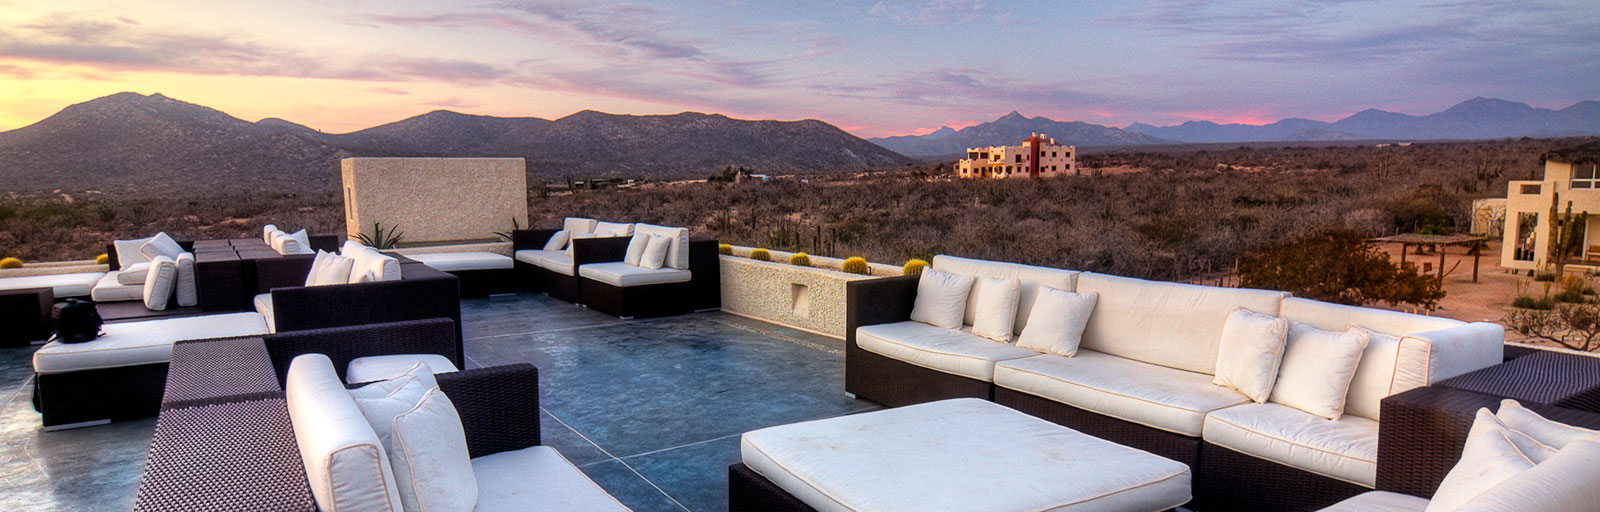 Mexico Yoga Retreat Center in Baja: Roof Deck Lounge